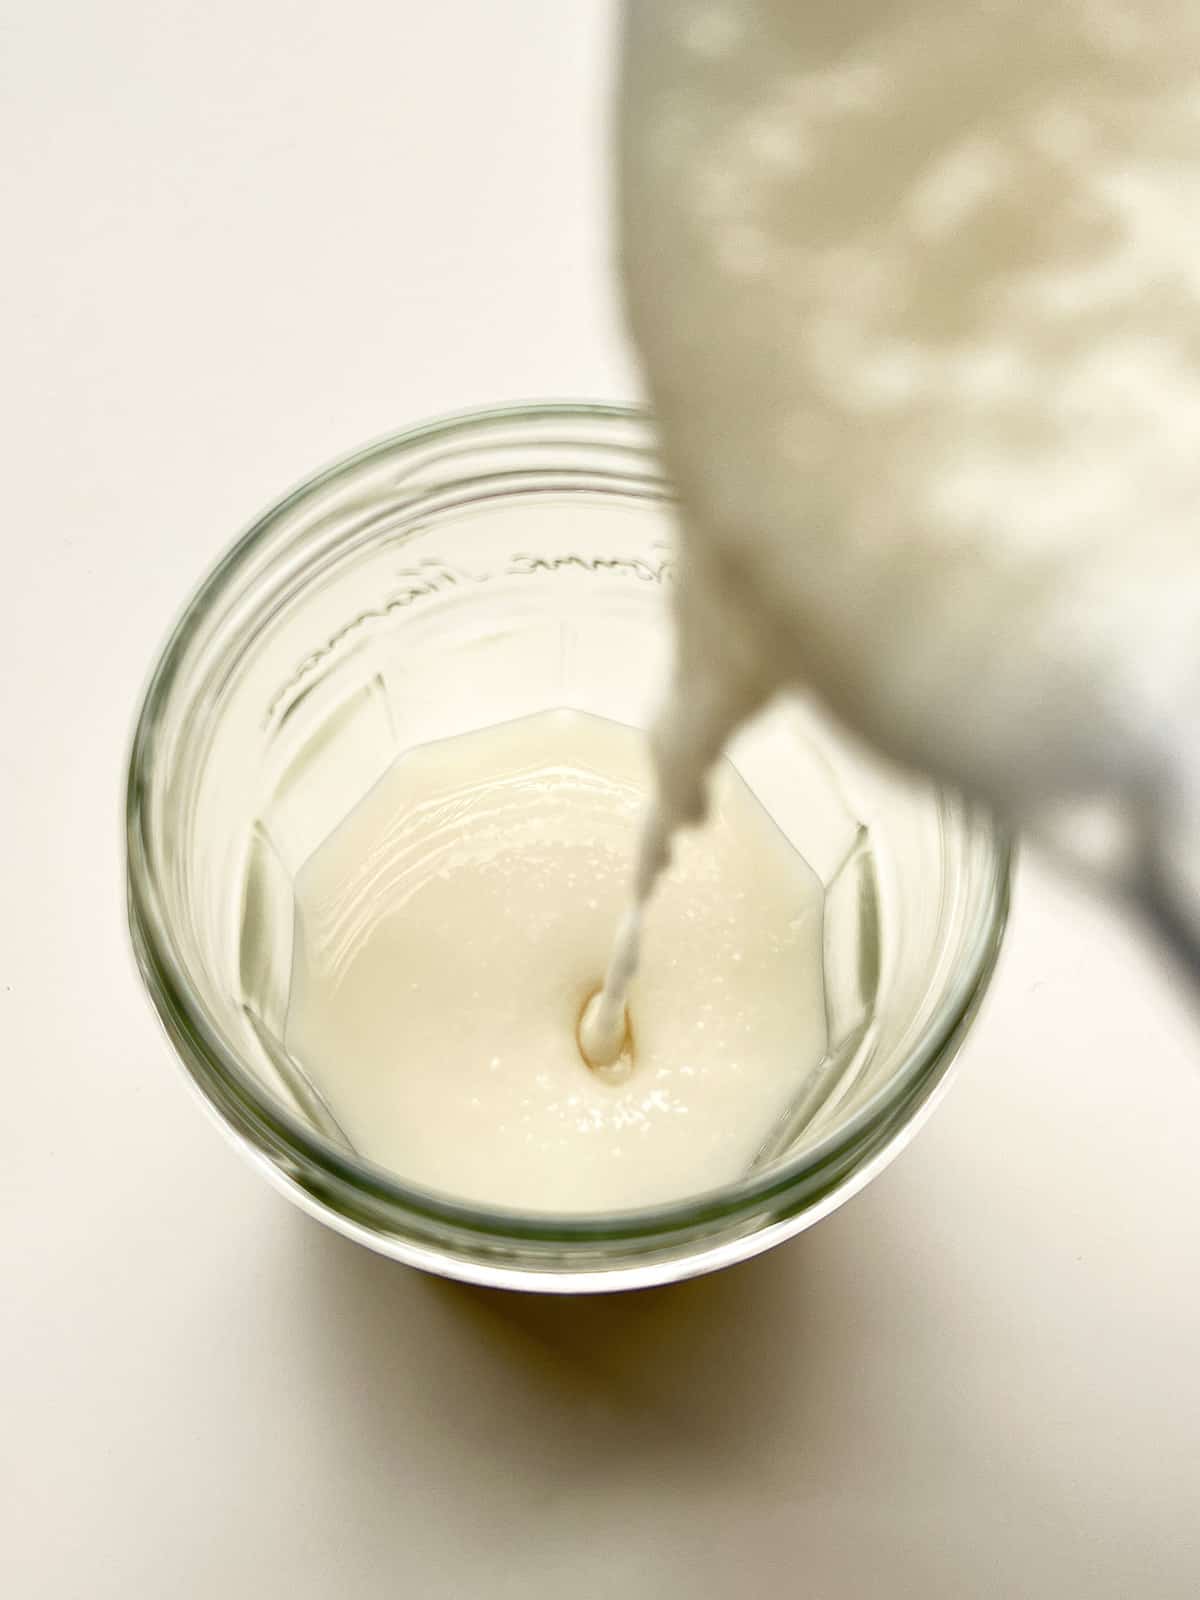 An image of coconut butter being poured into a glass jar.